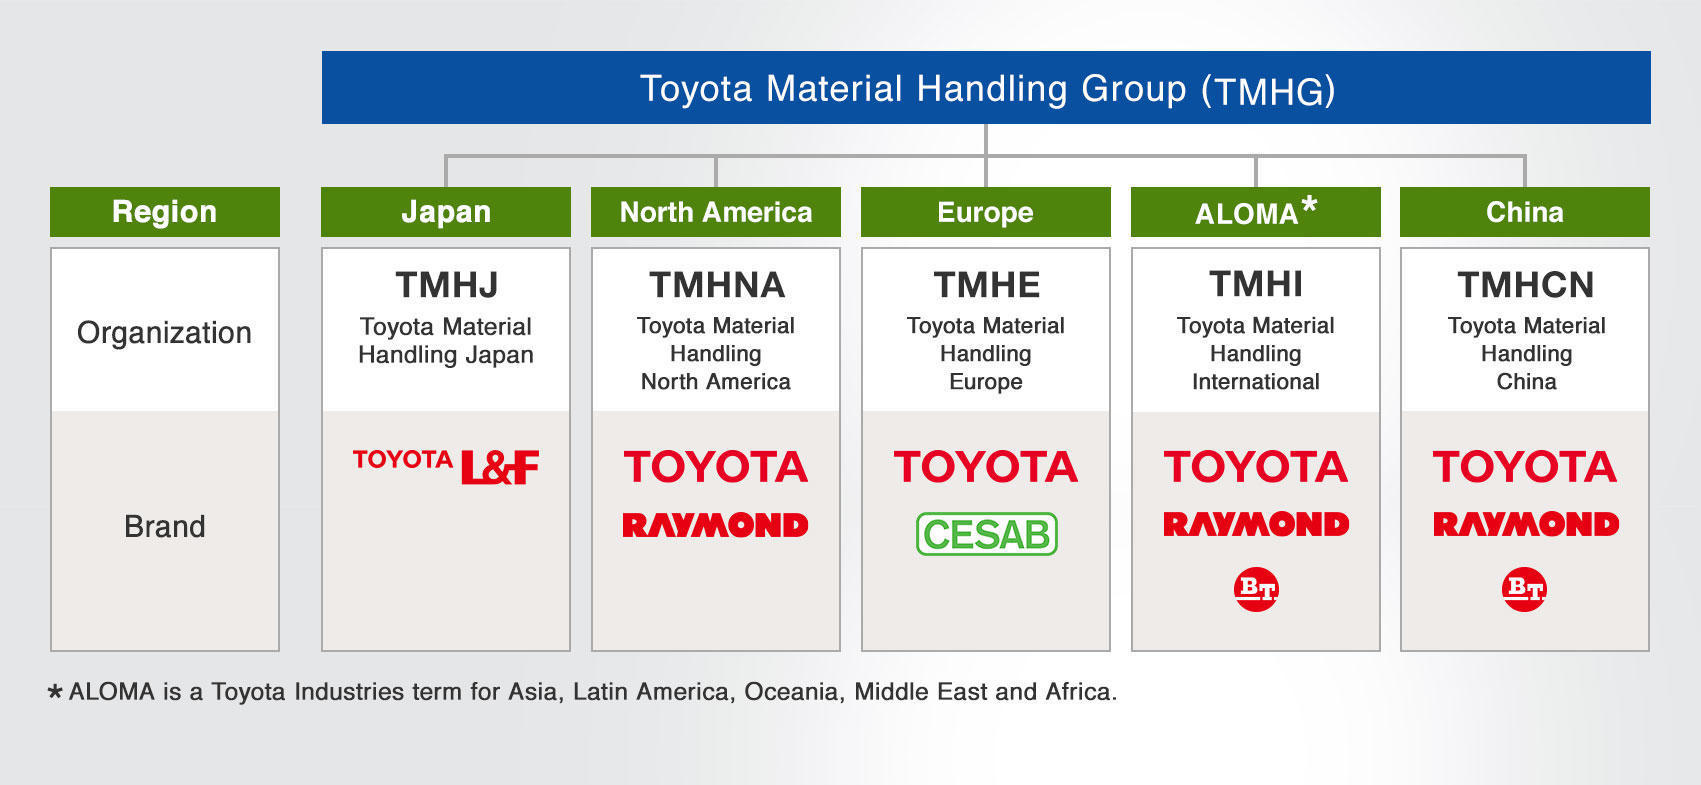 Toyota Material Handling Group (TMHG)